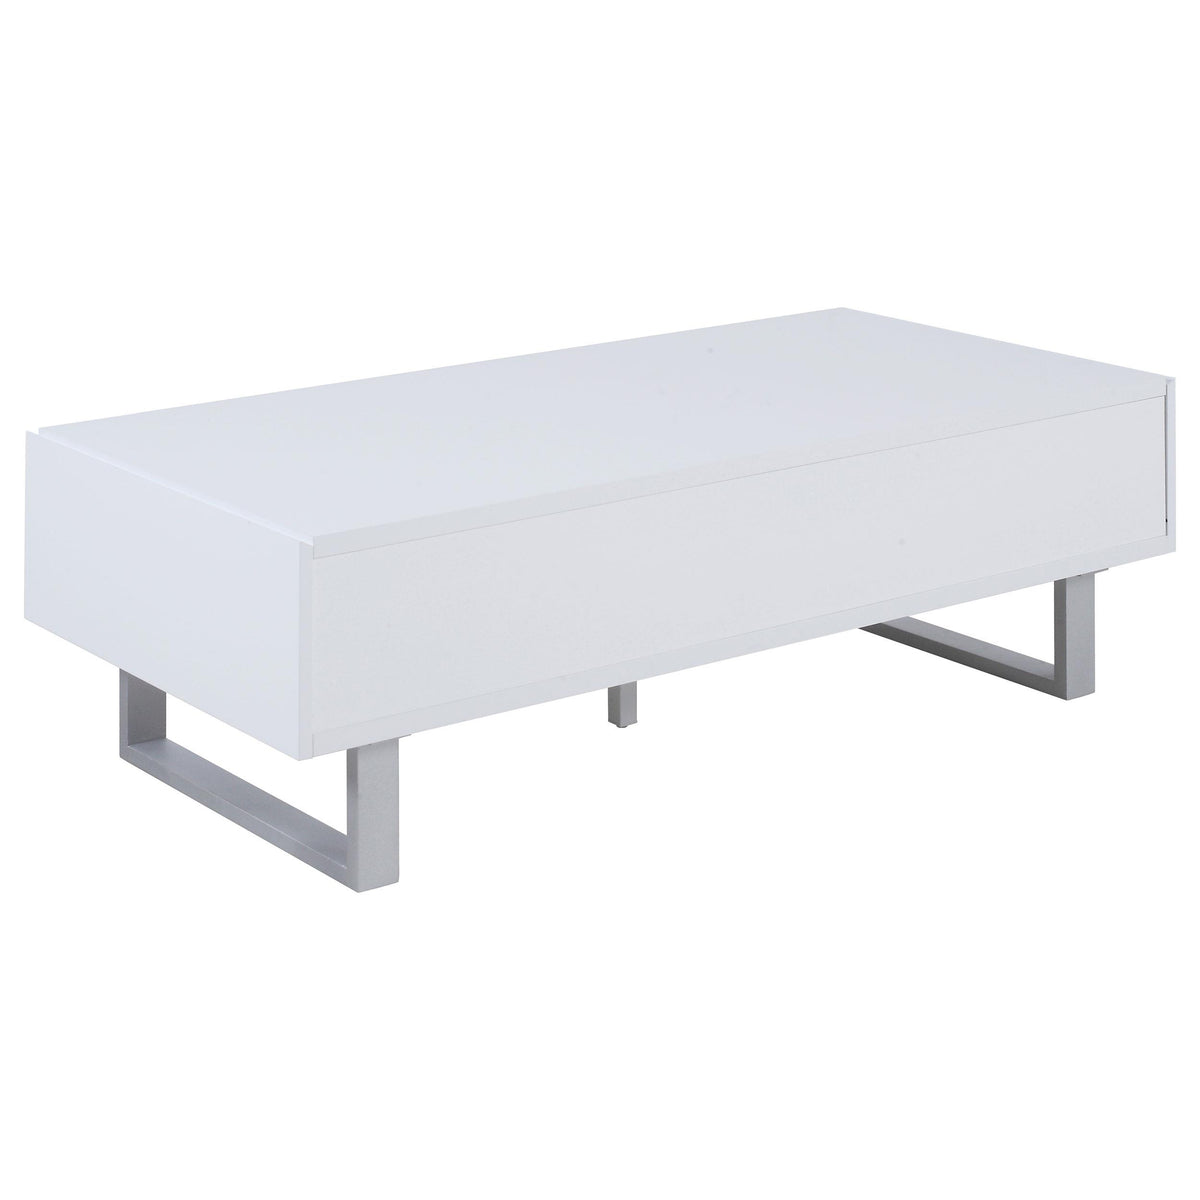 Atchison 2-drawer Coffee Table High Glossy White Atchison 2-drawer Coffee Table High Glossy White Half Price Furniture